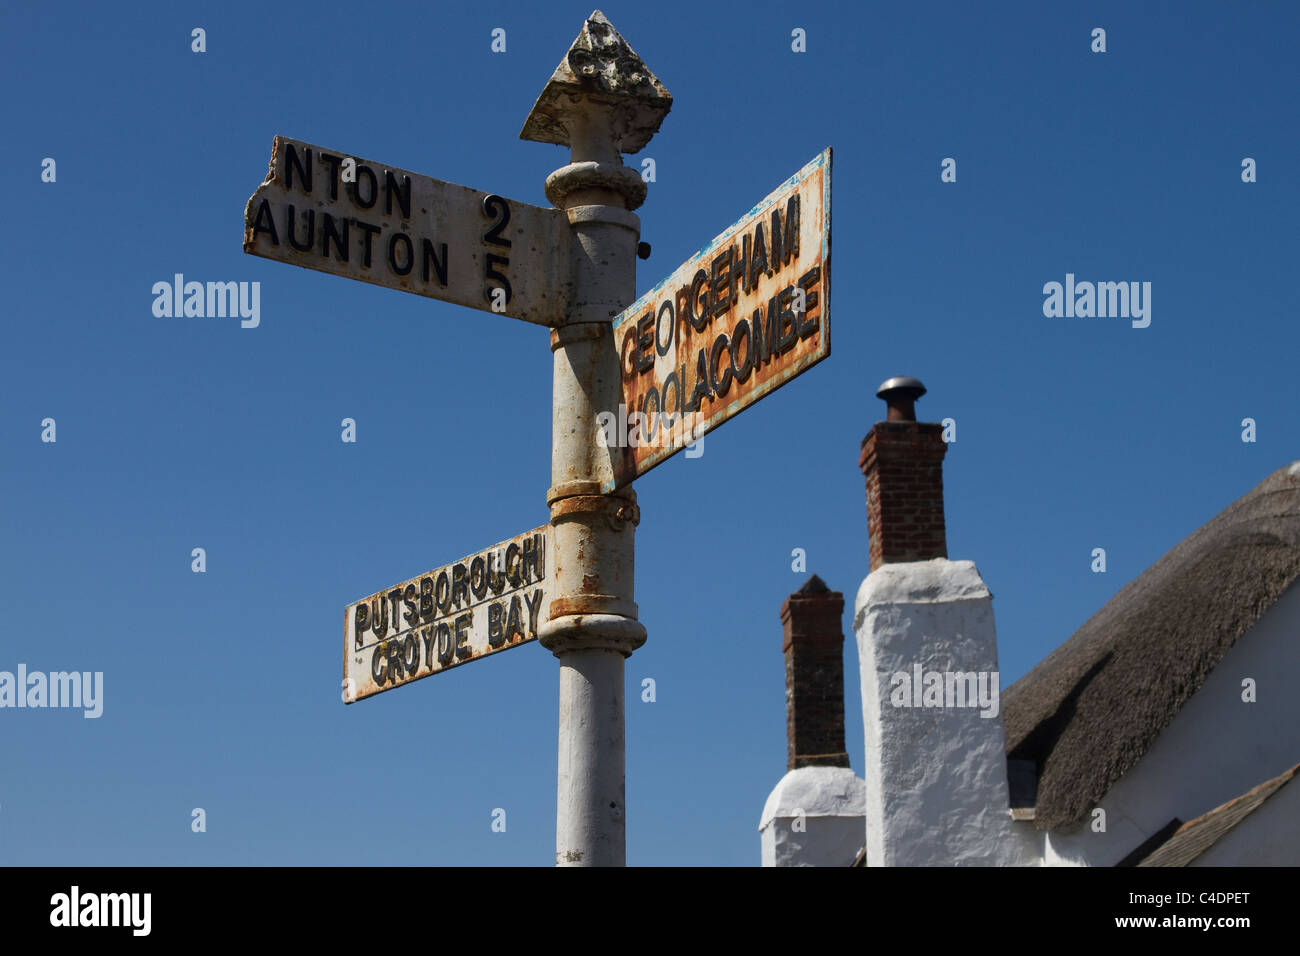 Georgeham, Woolacombe, Taunton, Croyde Bay. Old UK signpost, metal street sign for different destinations. Thatched Cottage in North Devon, UK Stock Photo